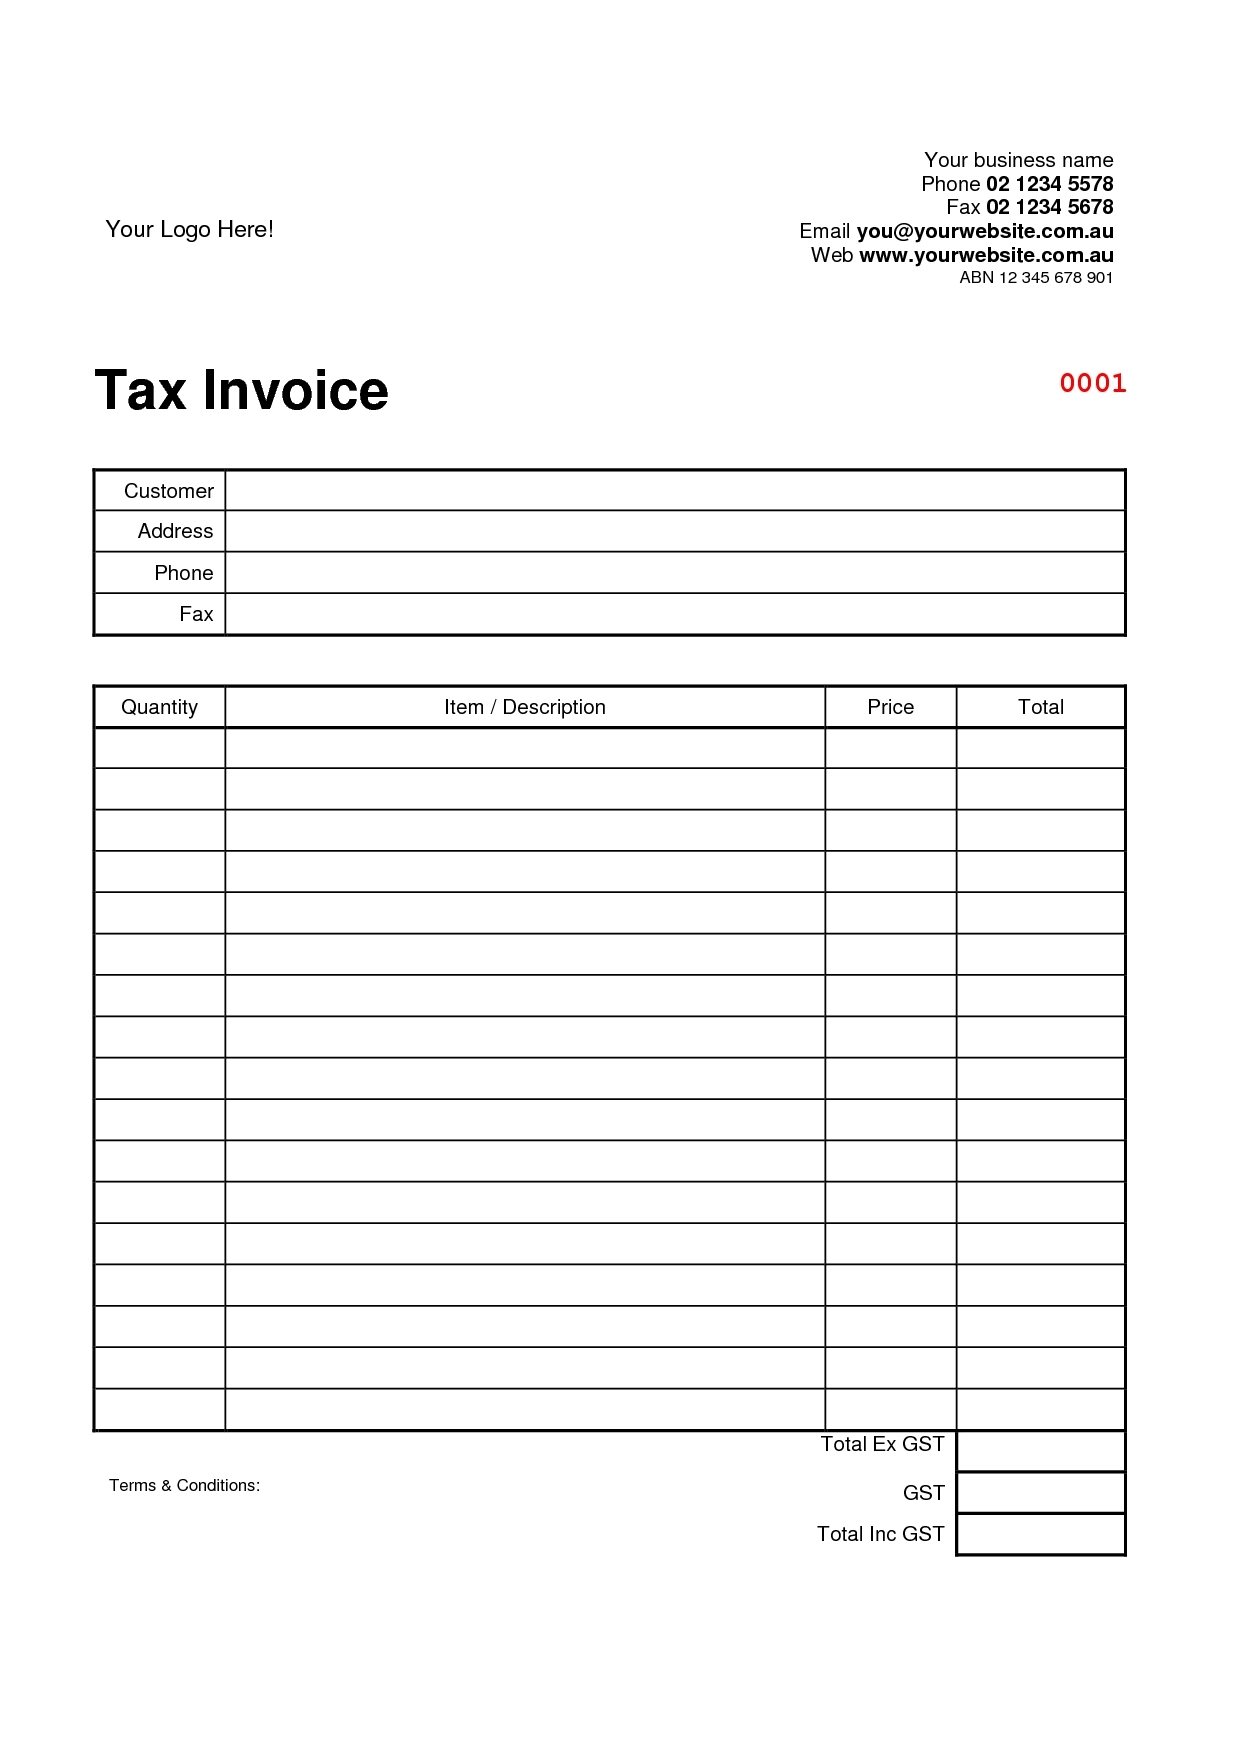 sample tax invoice template invoice template free 2016 tax invoices template